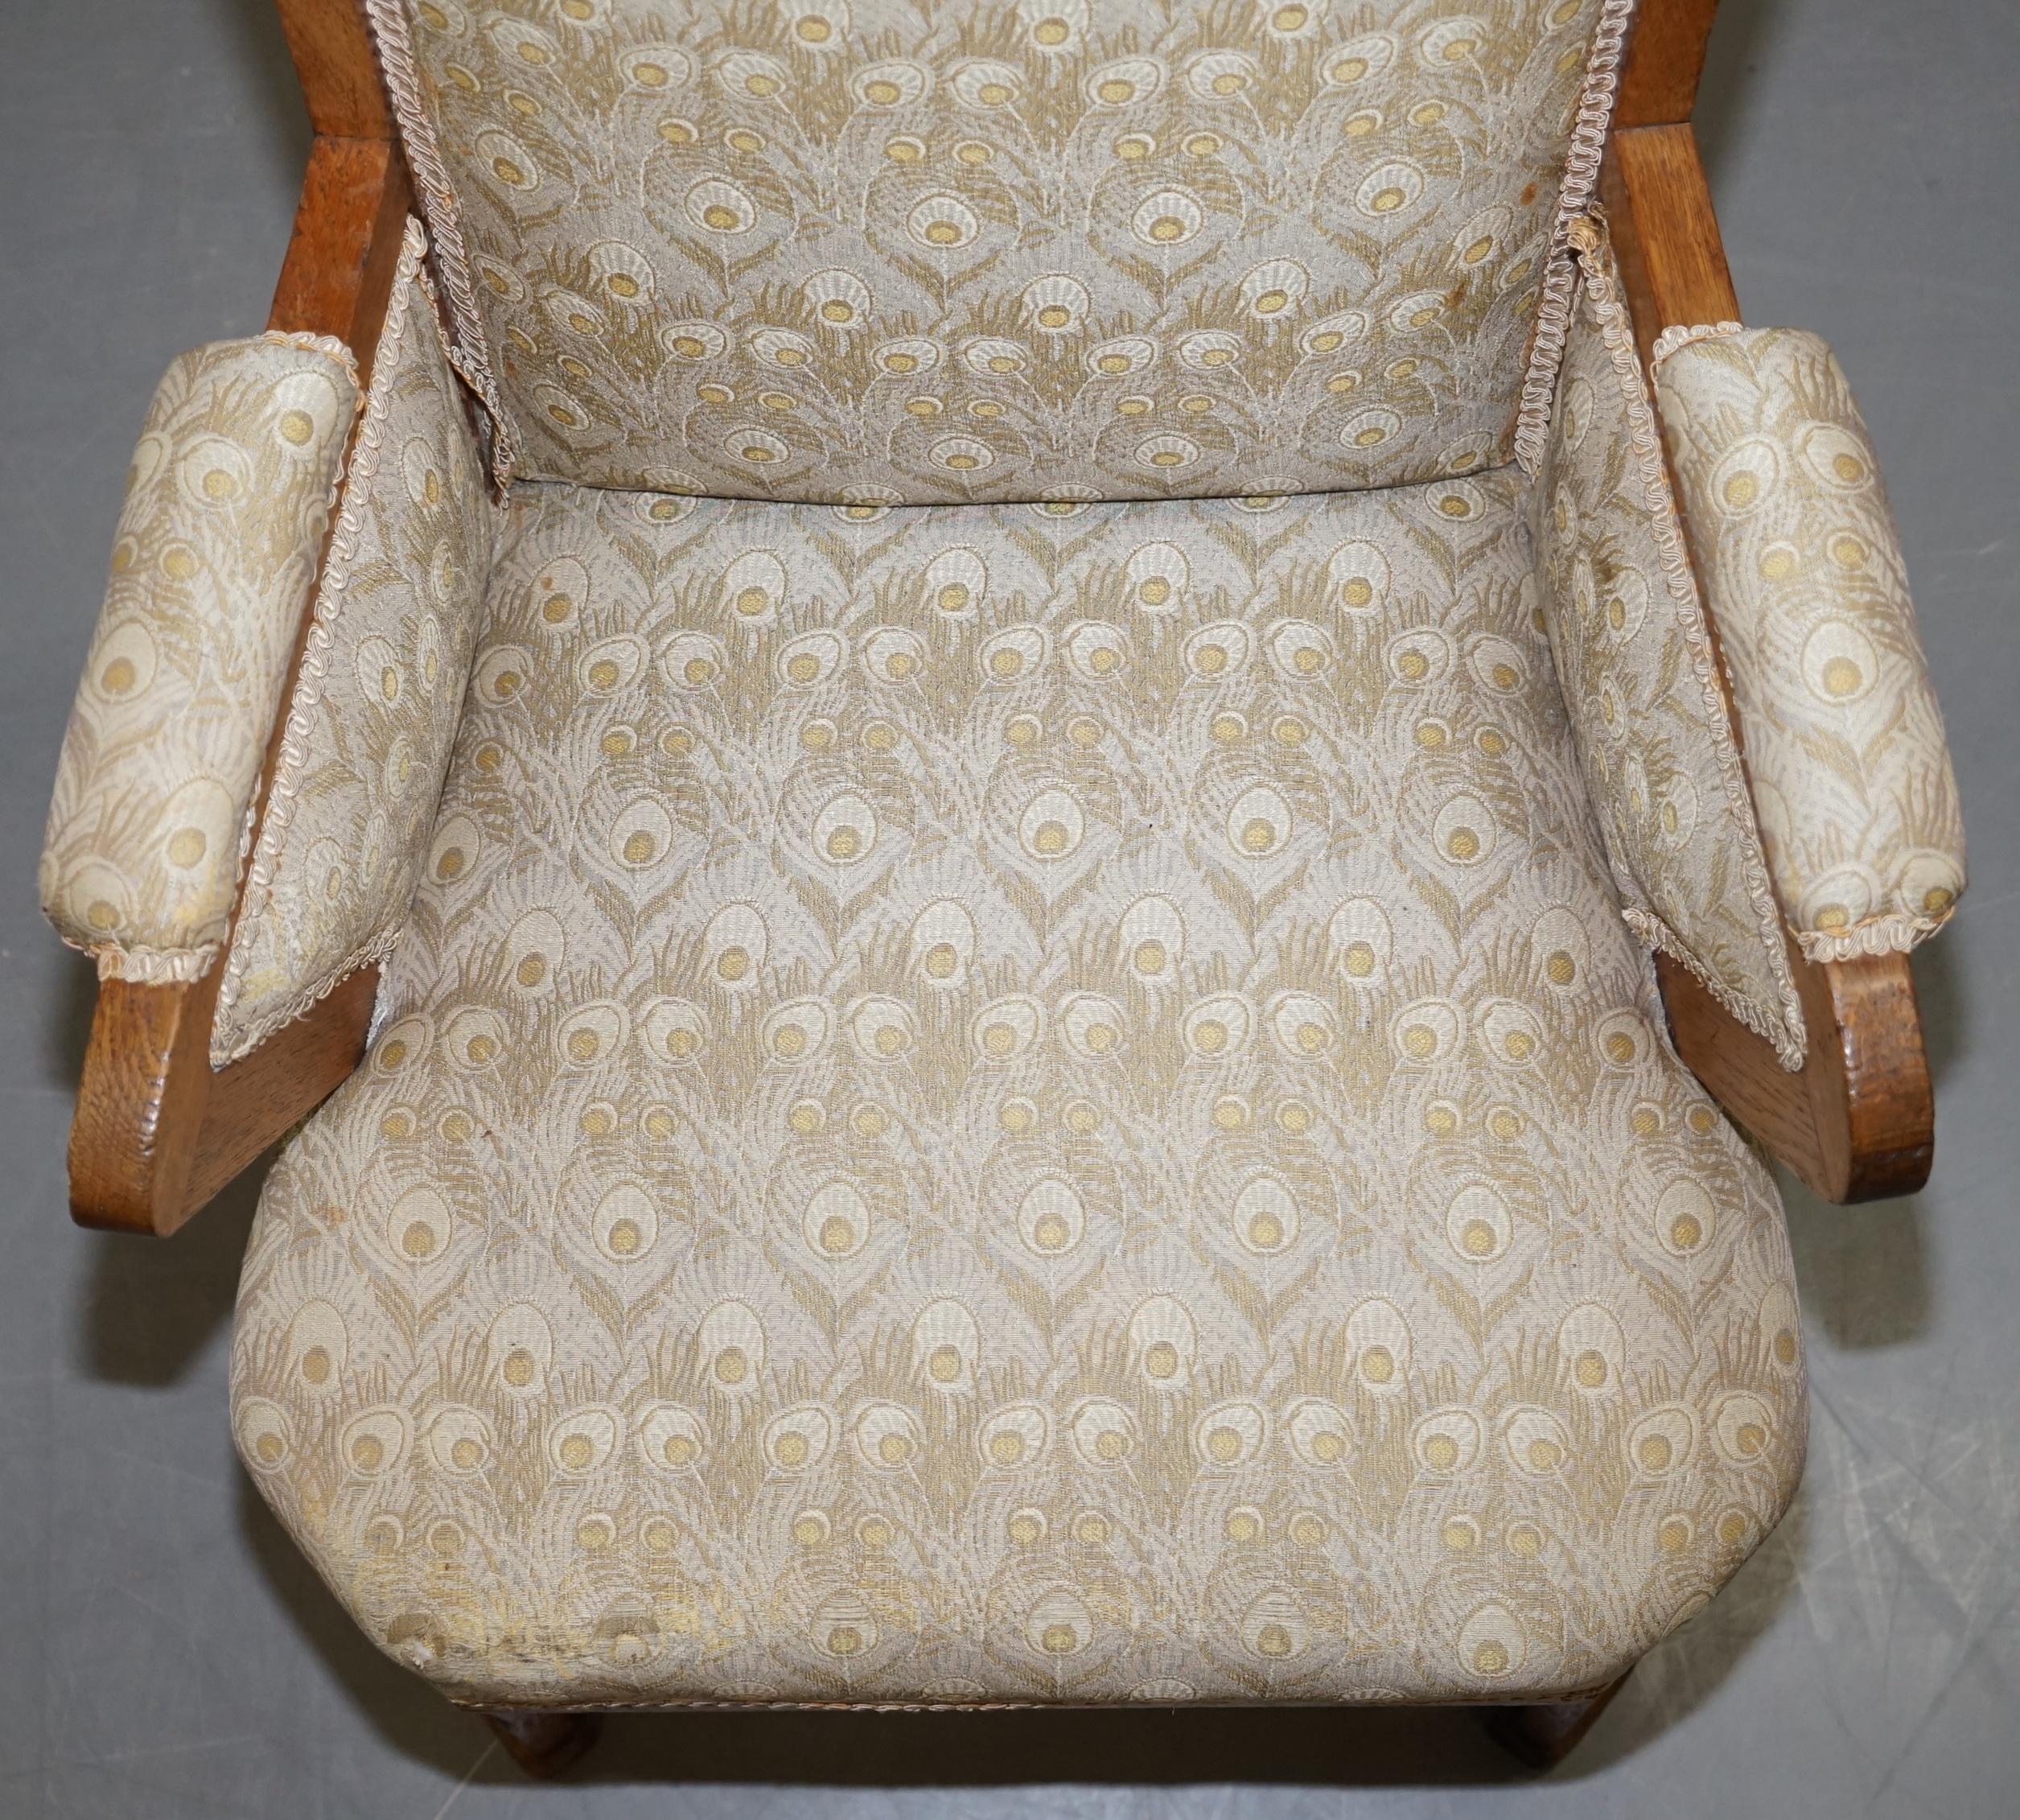 Hand-Crafted Liberty's London Peacock Fabric Upholstered Victorian Carved Wingback Armchair